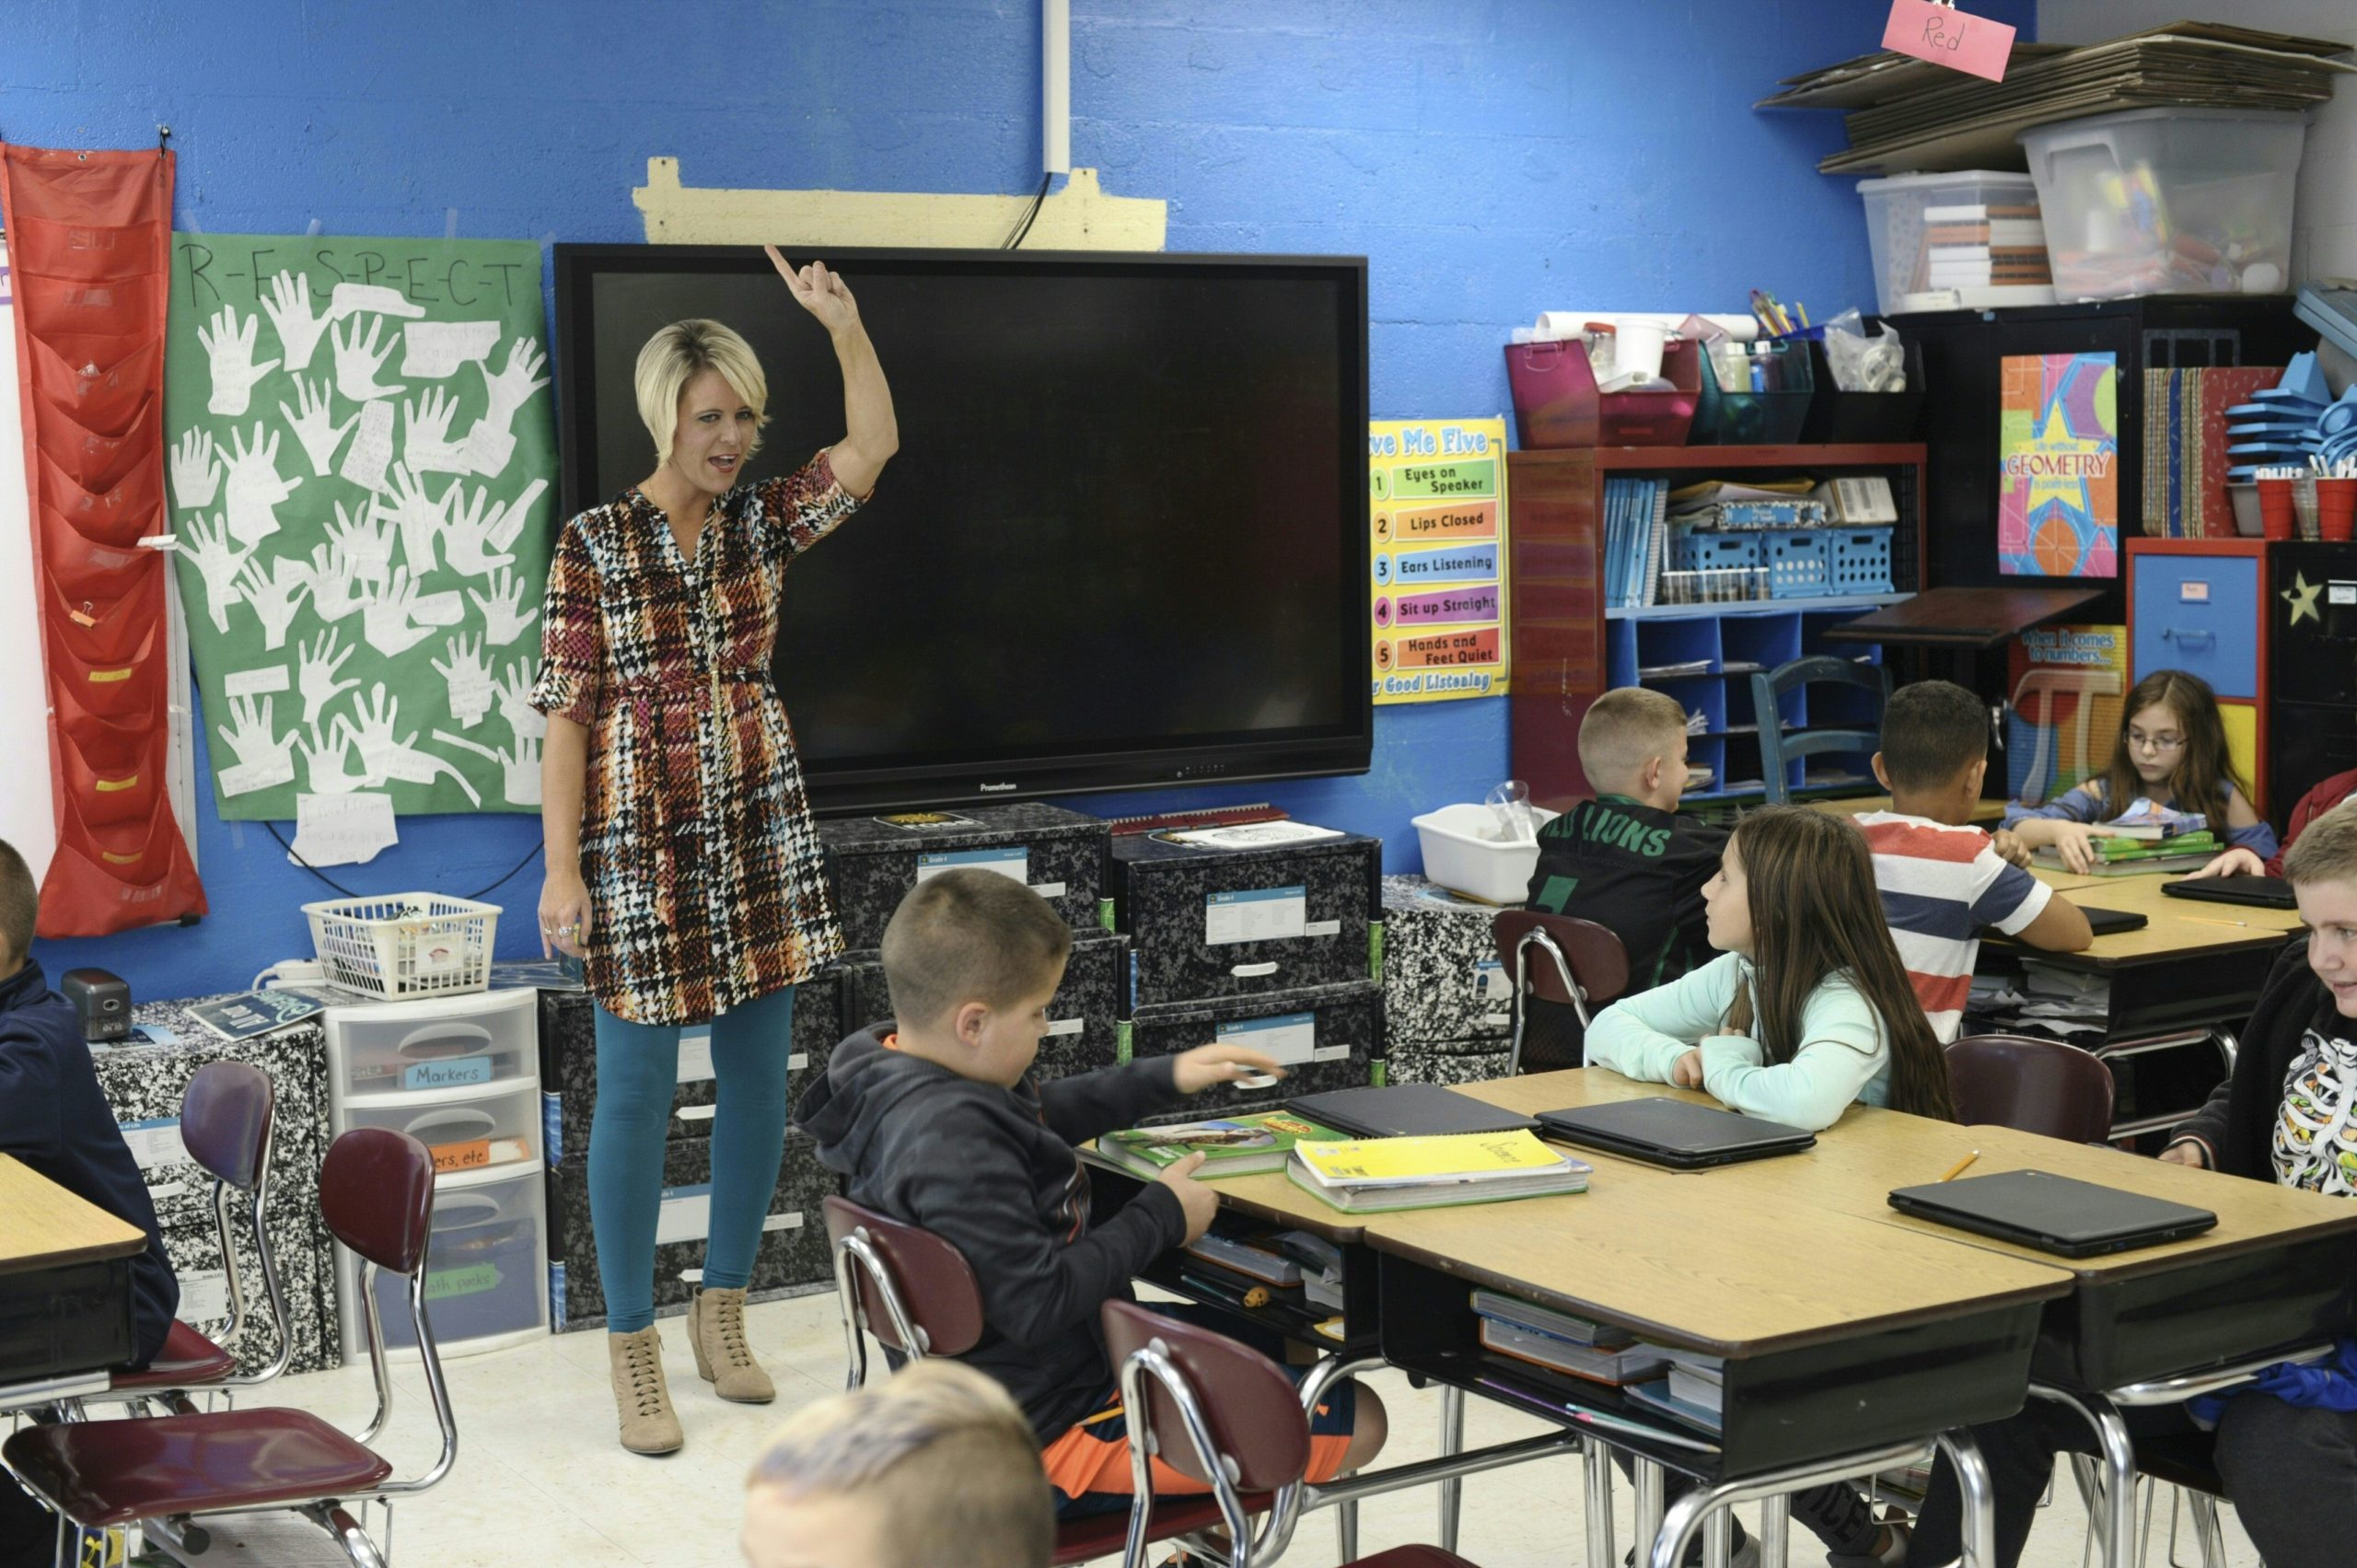 Amy Grady, who is running as an independent for a seat in the West Virginia state Senate, teaches in her classroom at Leon Elementary October 18, 2018 in Leon, West Virginia. - Teachers like Amy Grady successfully went on strike this year across West Virginia demanding better health care and higher pay, and now she hopes to give state legislators a lesson, by winning a state senate seat. With labor activism catching fire and spreading to multiple US states, a record number of teachers -- 1,455 current and former educators, according to the National Education Association -- are running for office in the November 6 midterm elections. (Photo by MICHAEL MATHES / AFP) / With AFP Story by Michael MATHES: From picket lines to polls, US teachers eye political office (Photo credit should read MICHAEL MATHES/AFP via Getty Images)